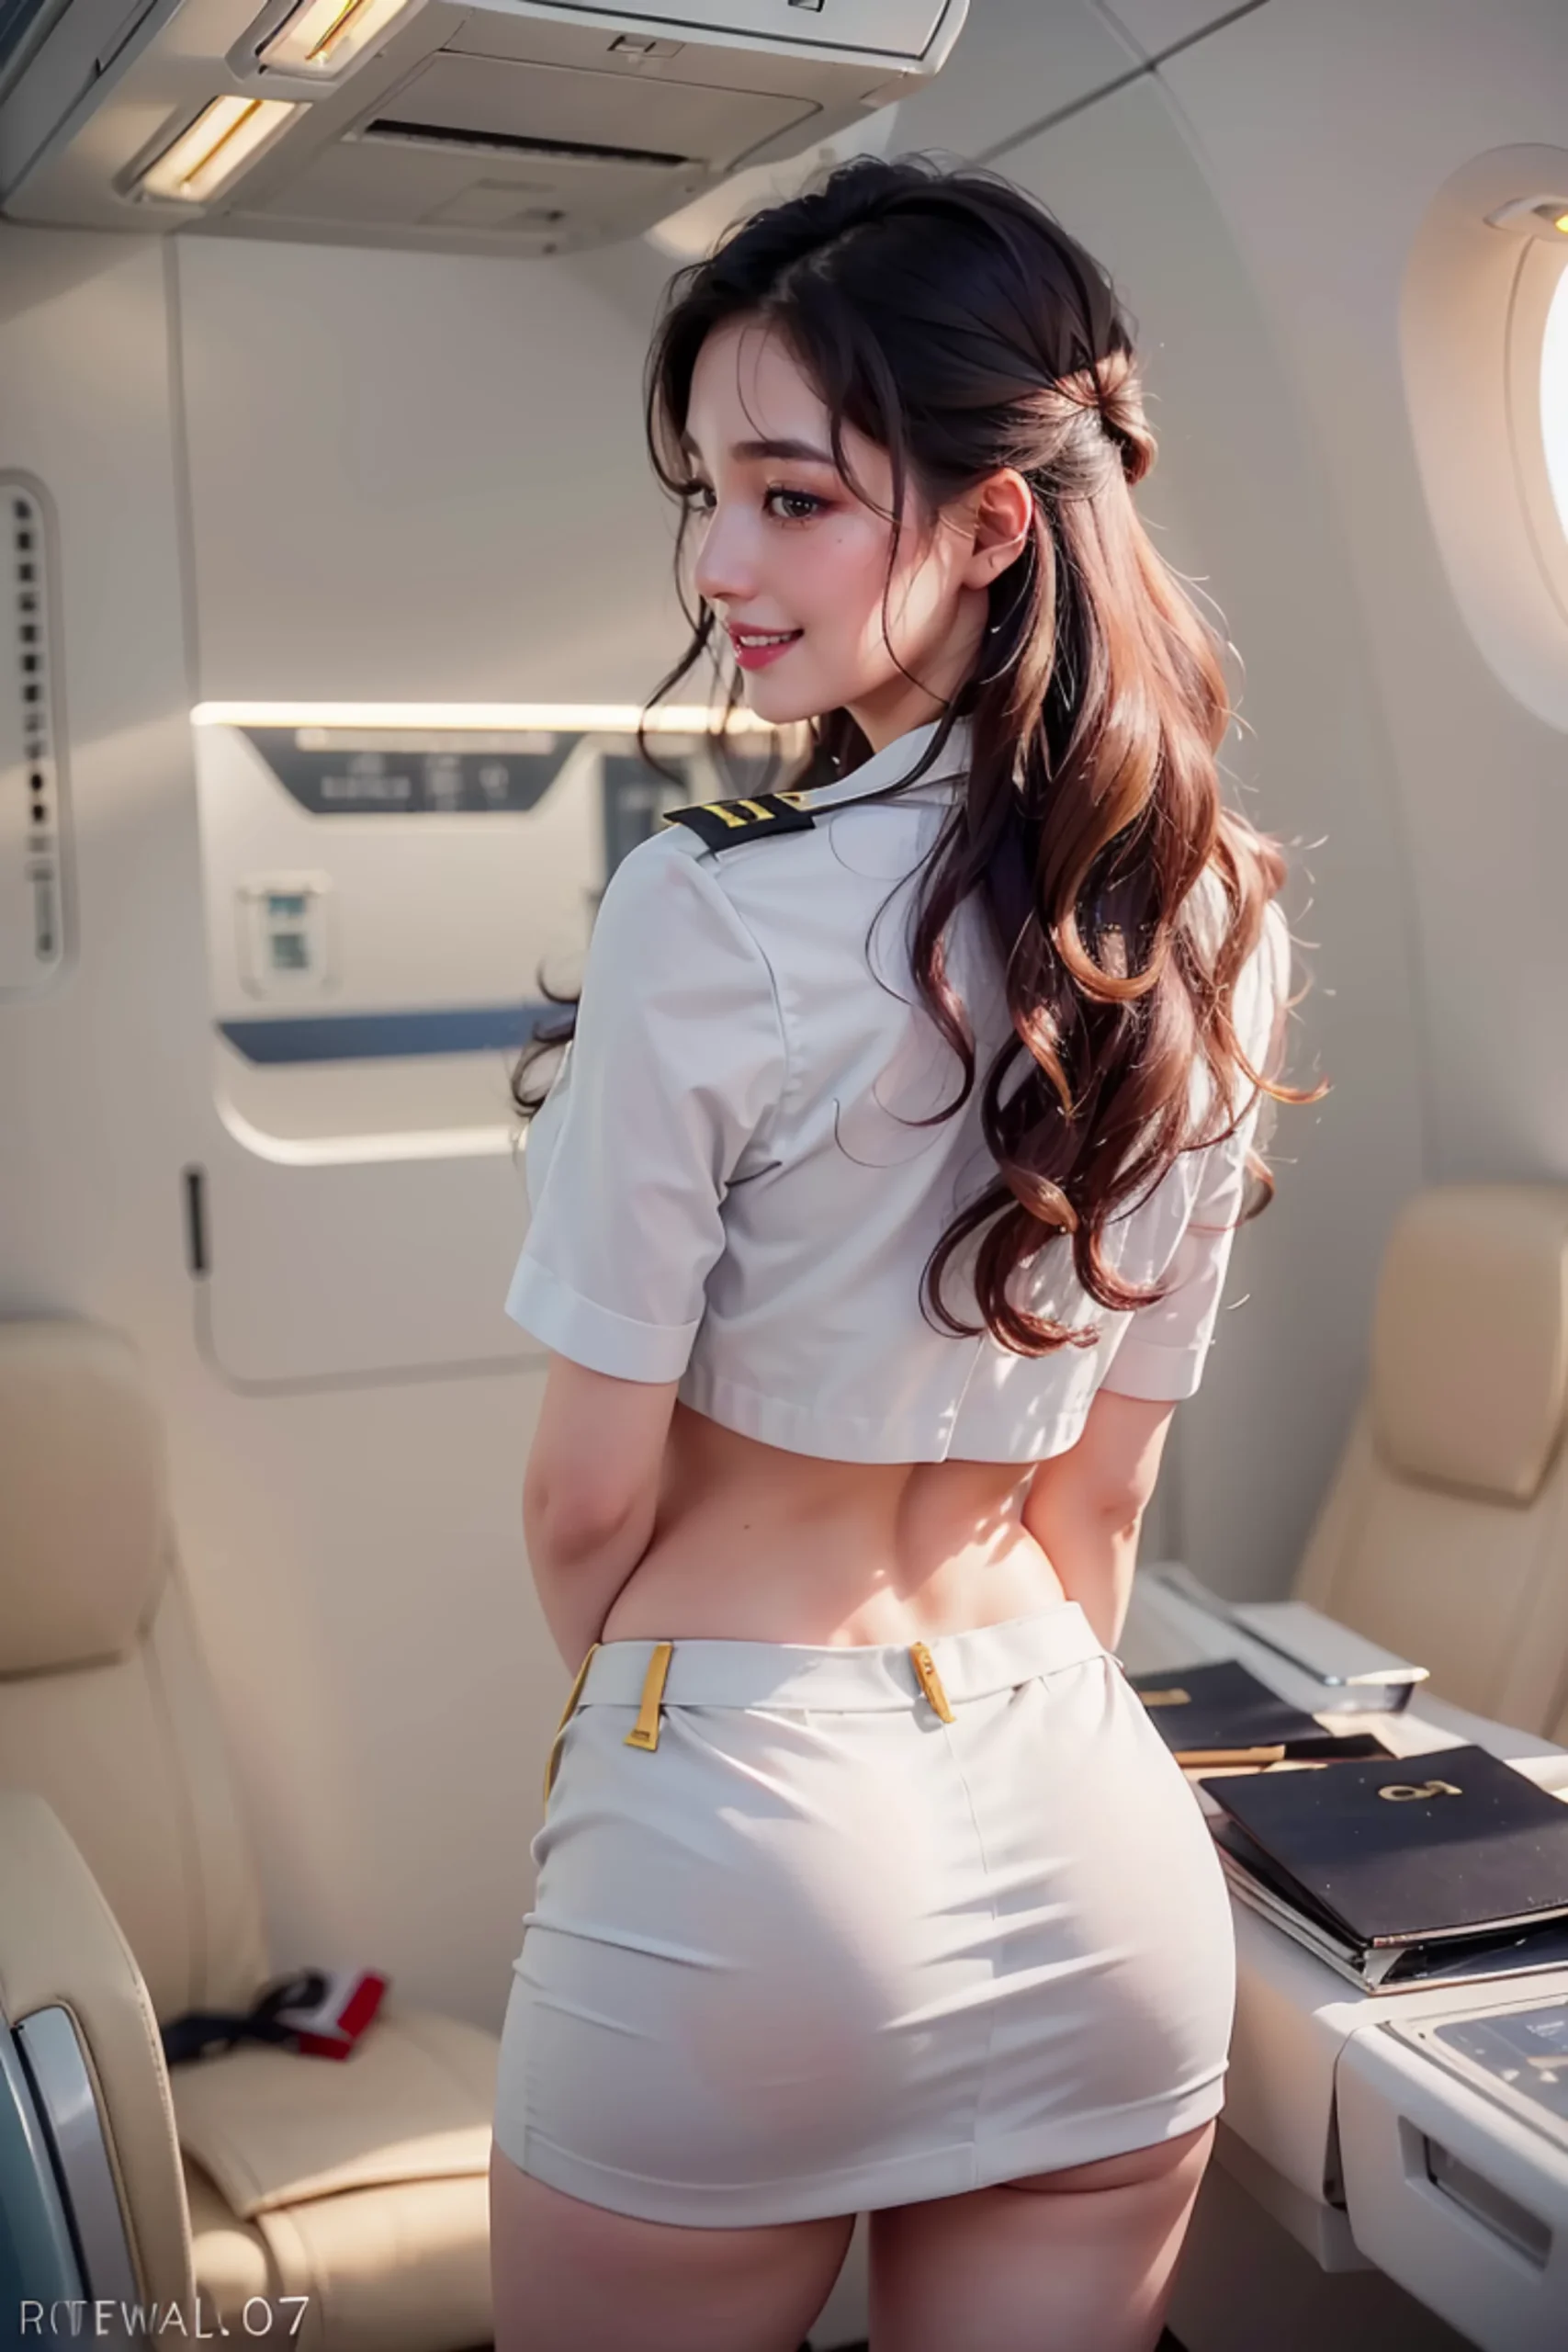 Sexy Flight Attendant Cosplay Vol. 2 Images 35